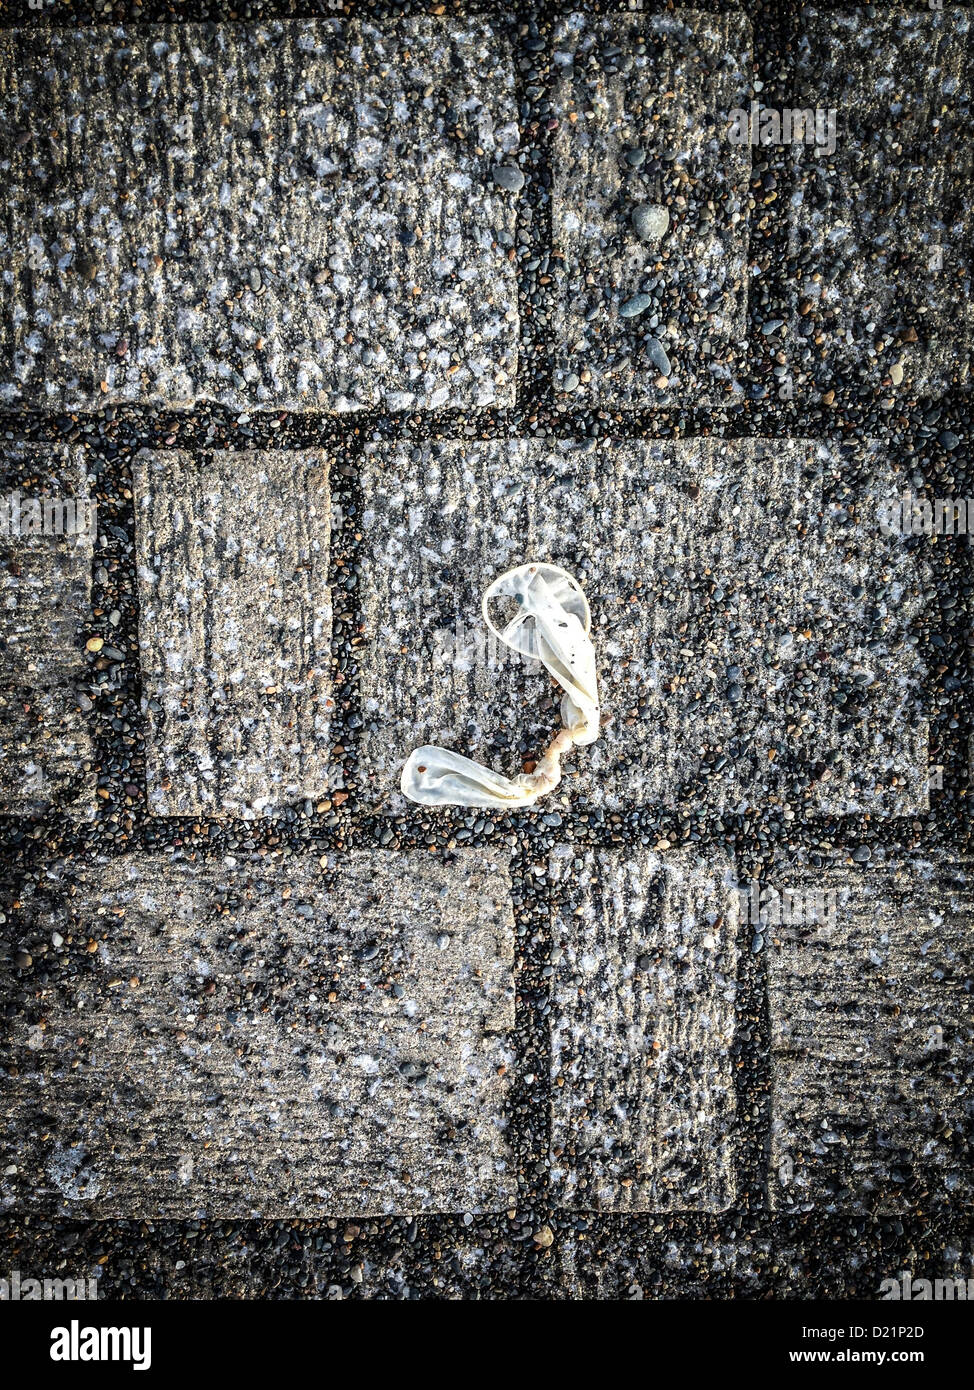 Looking down at a discarded used condom on the ground pavement sidewalk, UK Stock Photo